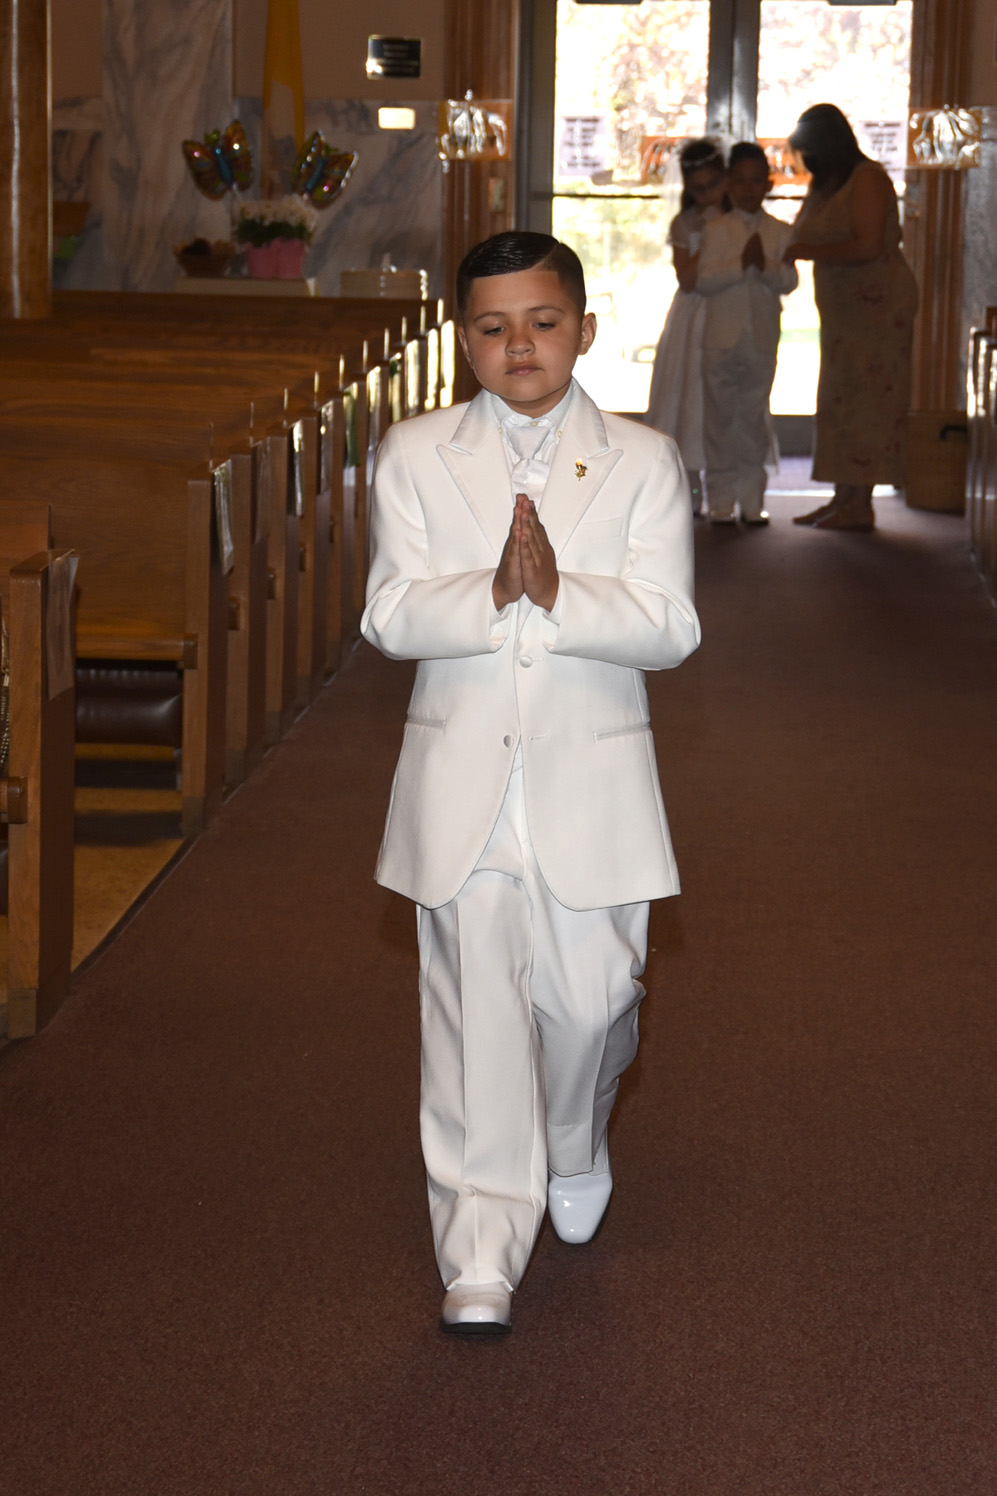 FIRST-COMMUNION-MAY-16-2021-174